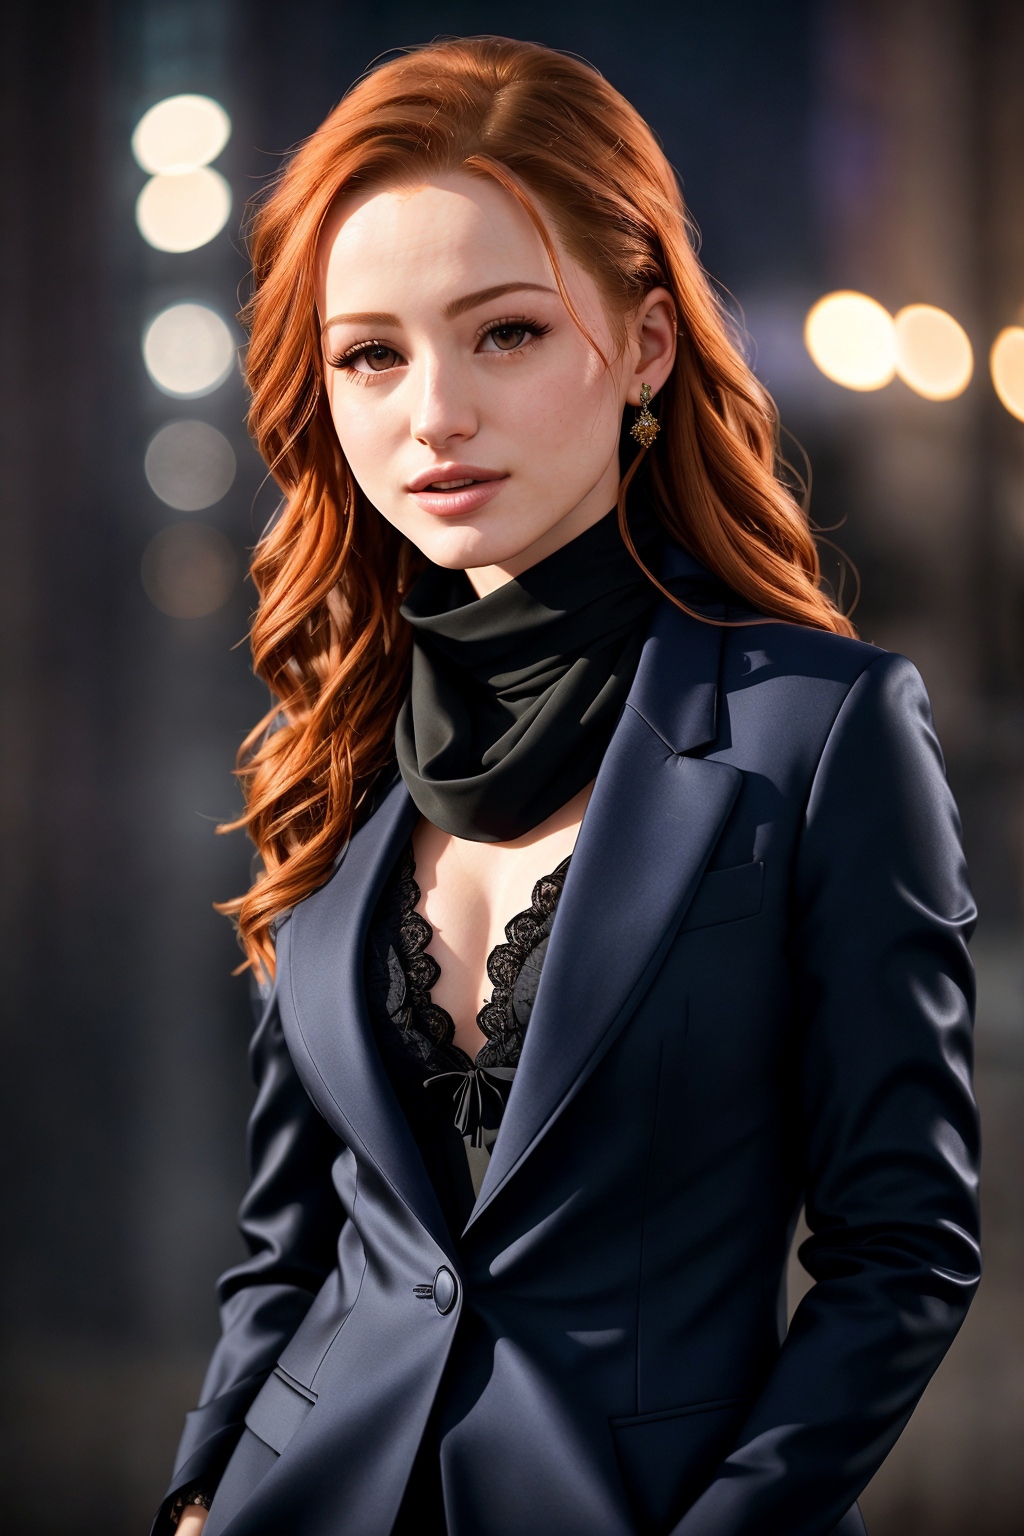 Madelaine Petsch image by ngsm000